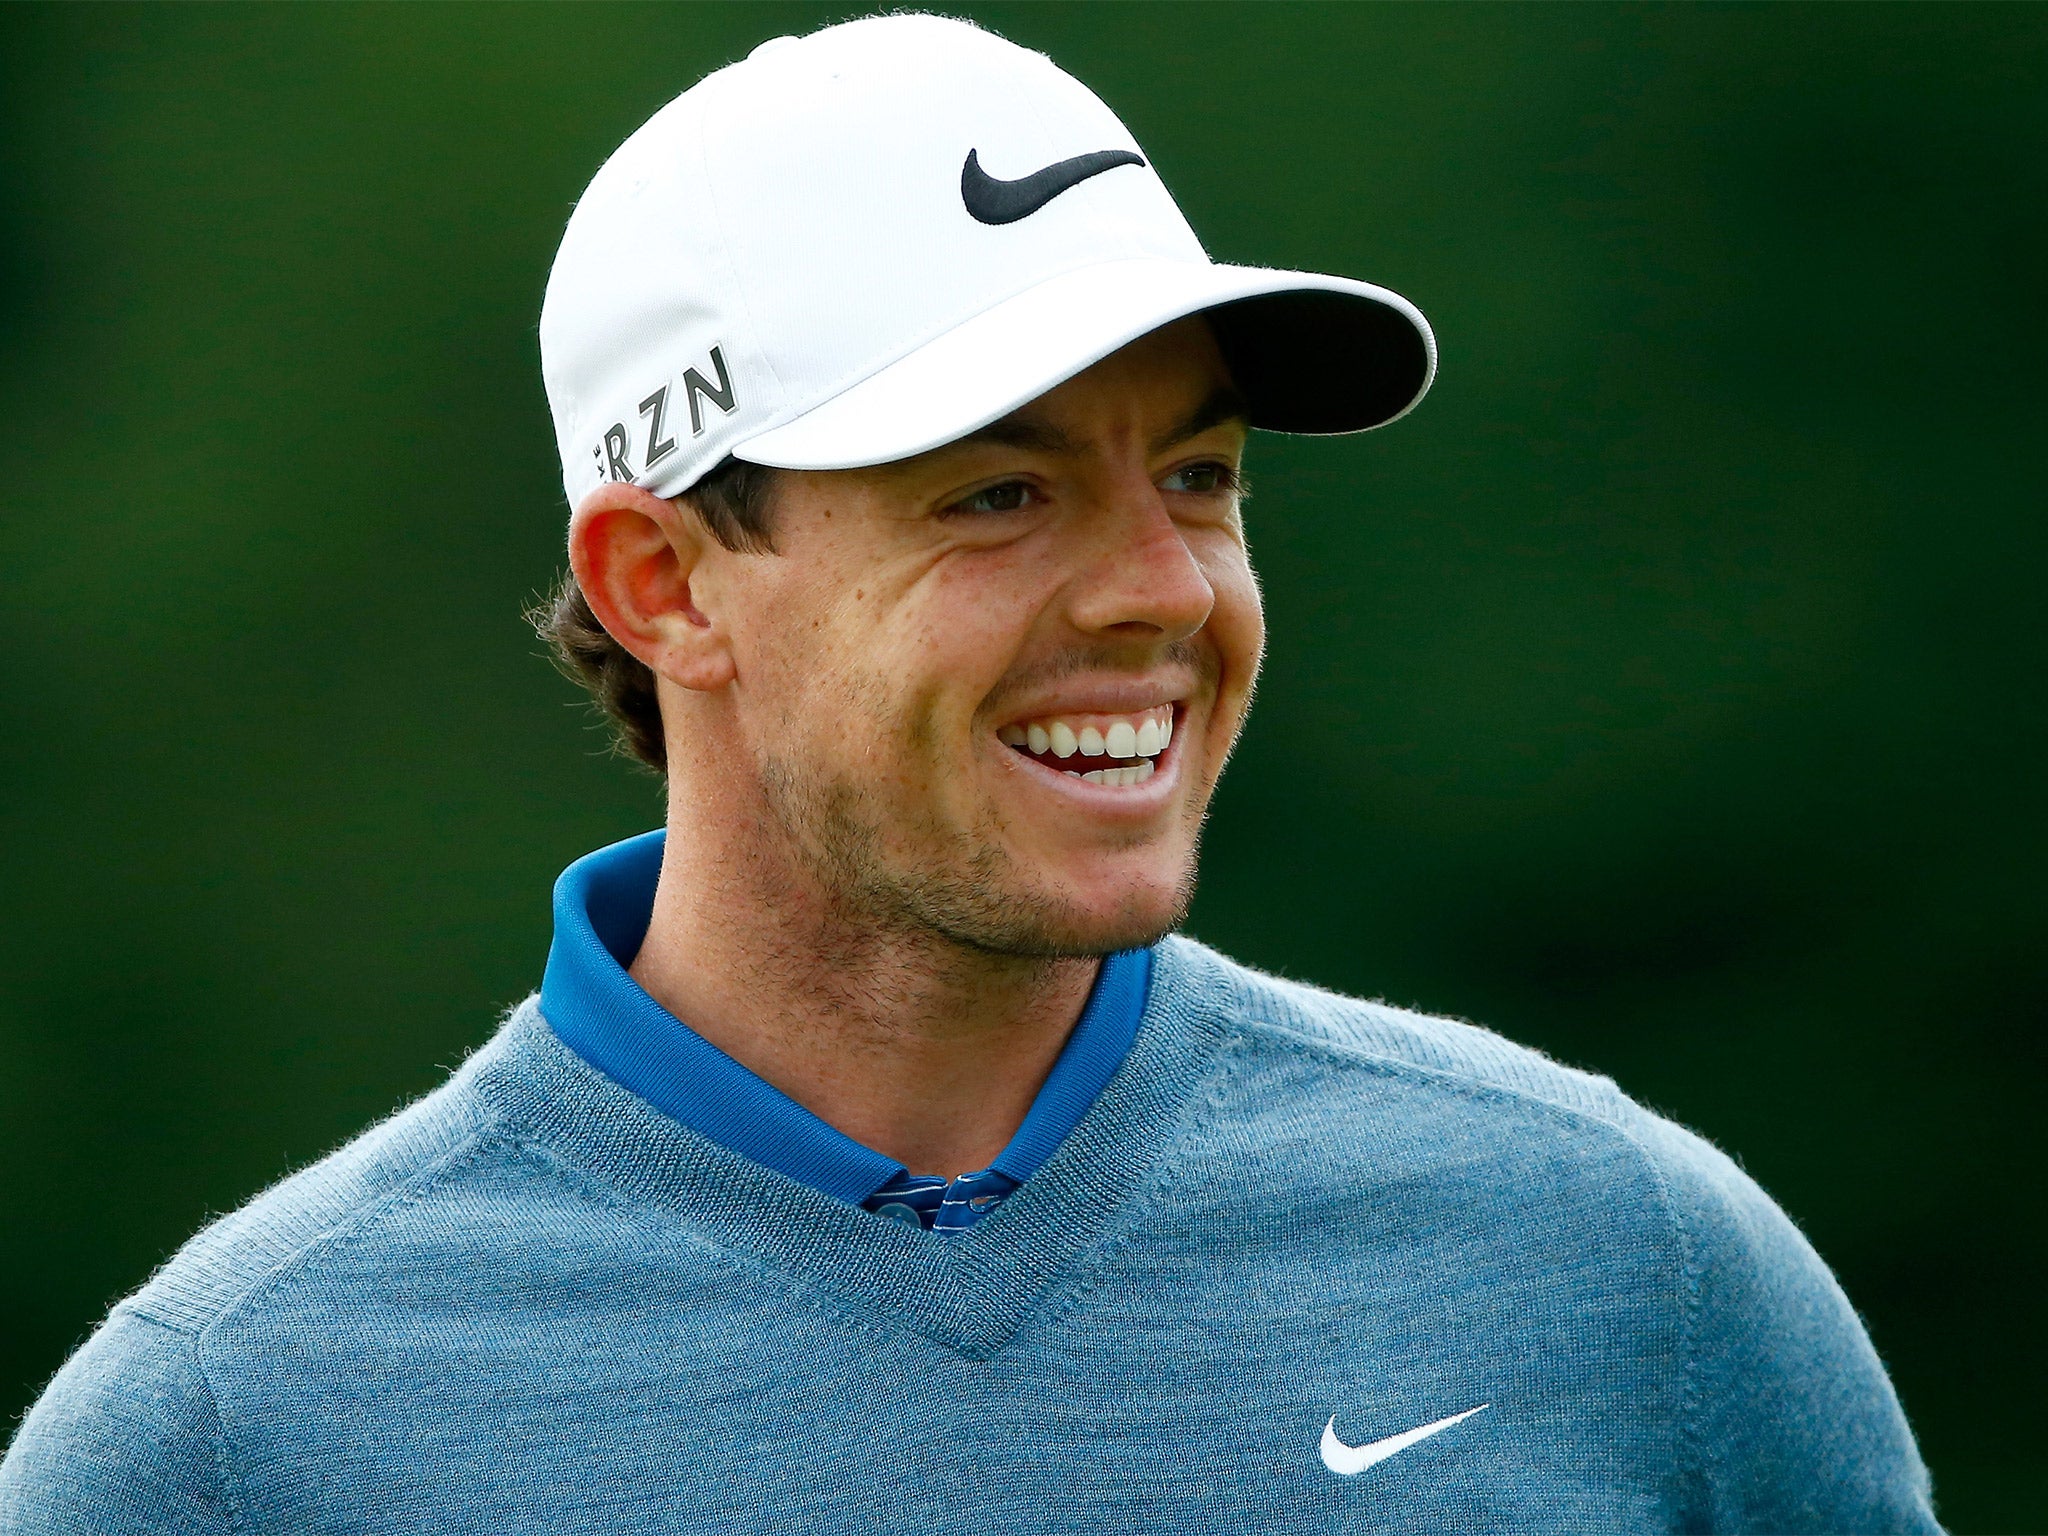 Rory McIlroy smiles during a practice round for the World Golf Championships-Bridgestone Invitational in Akron, Ohio